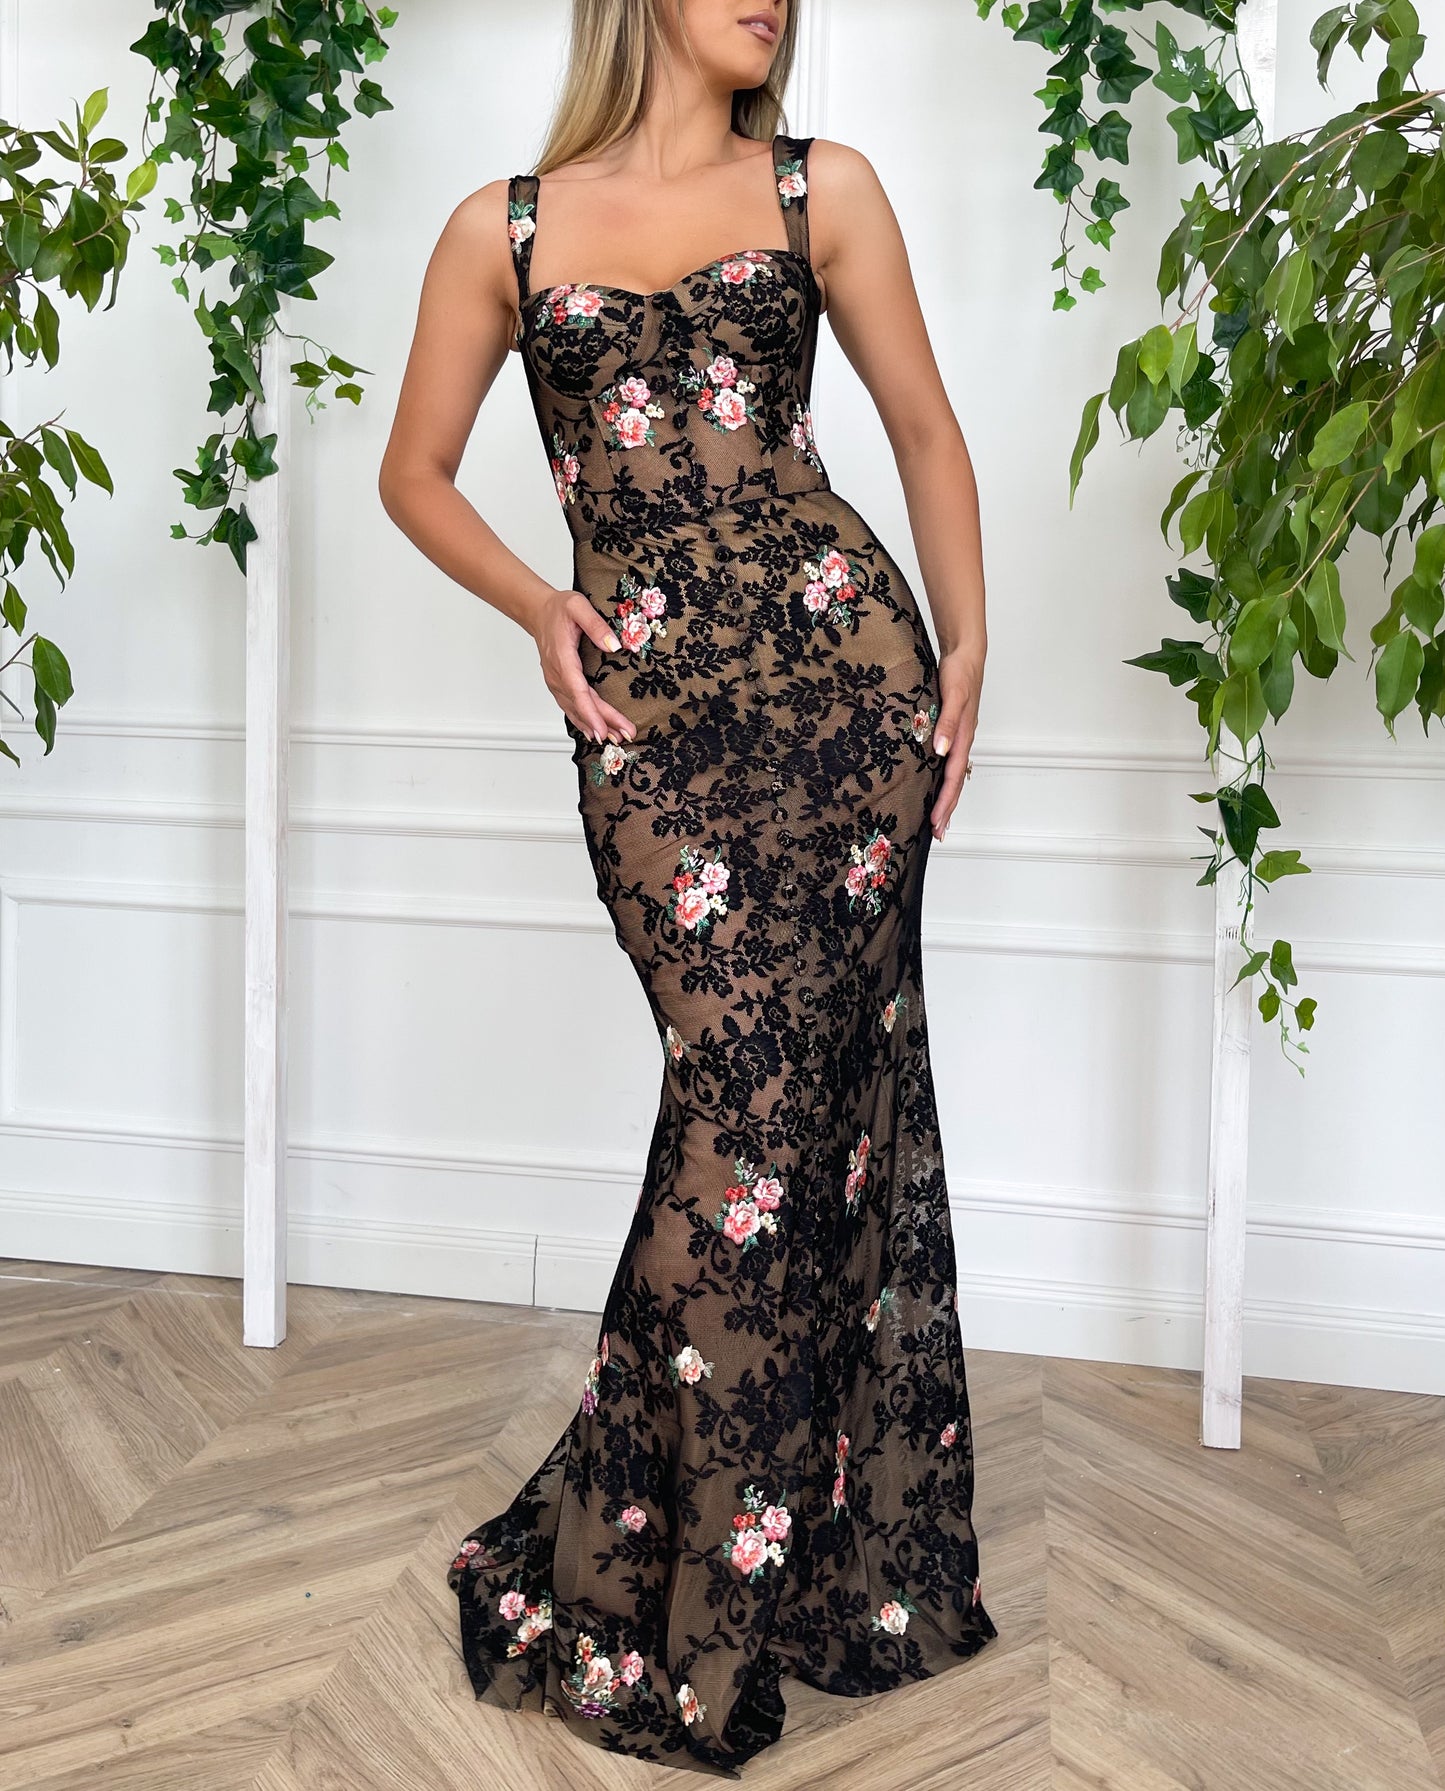 Black mermaid dress with spaghetti straps, embroidery and flowers